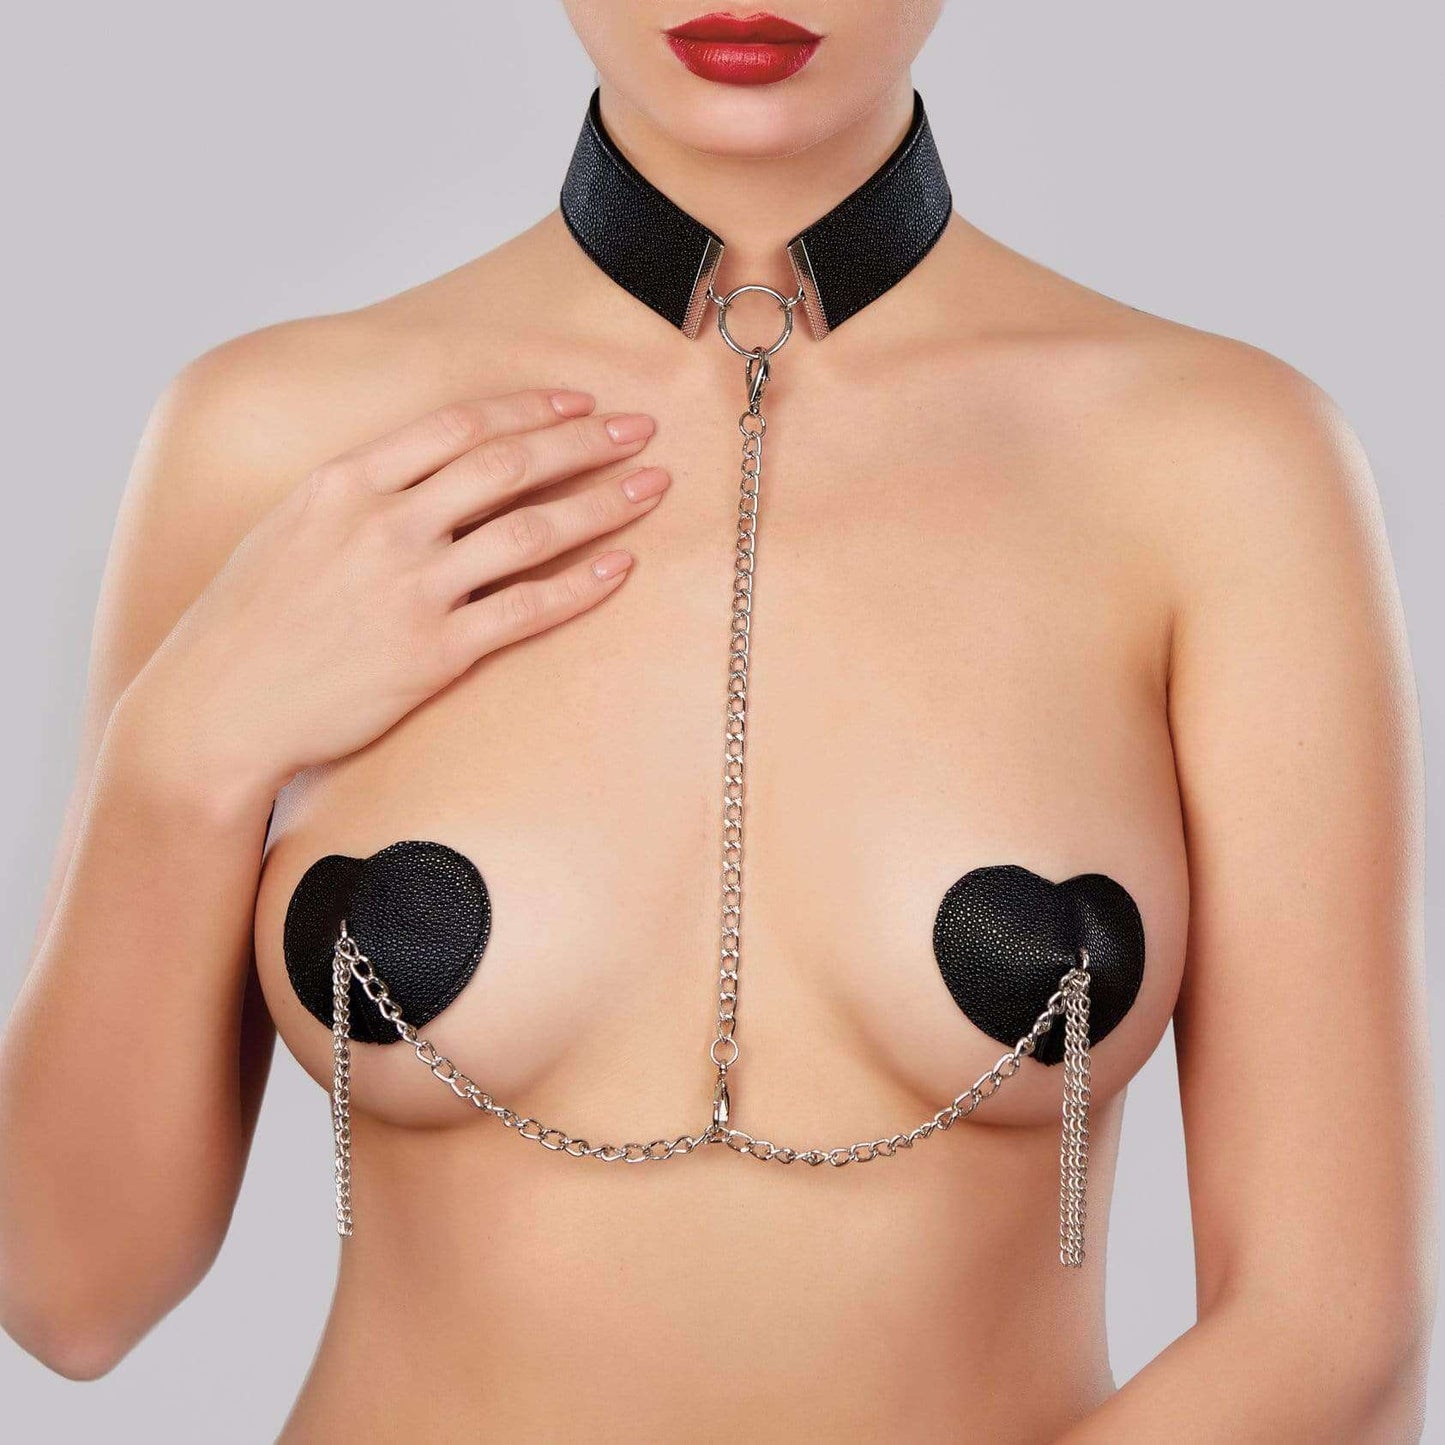 Le Burlesque Collar with Detachable Heart Pasties - Black - Thorn & Feather Sex Toy Canada